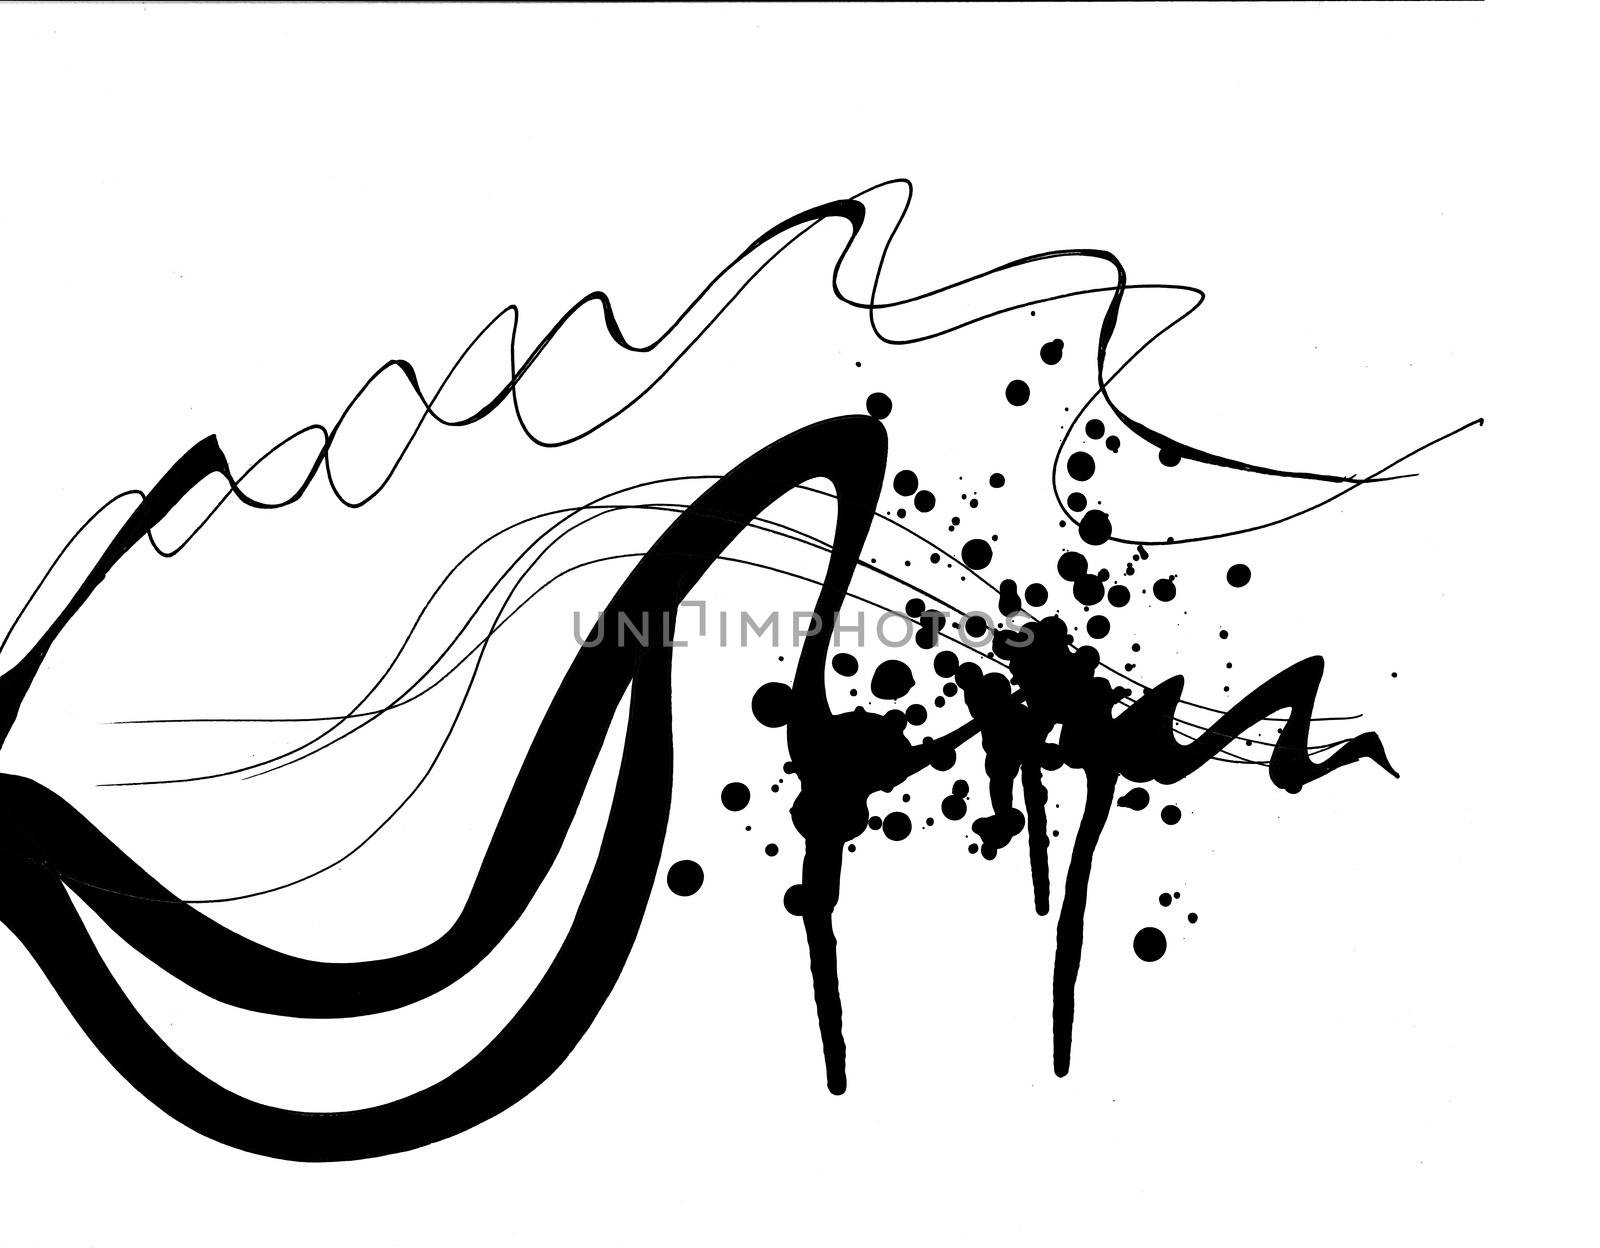 Line and ink splatters by jeremywhat